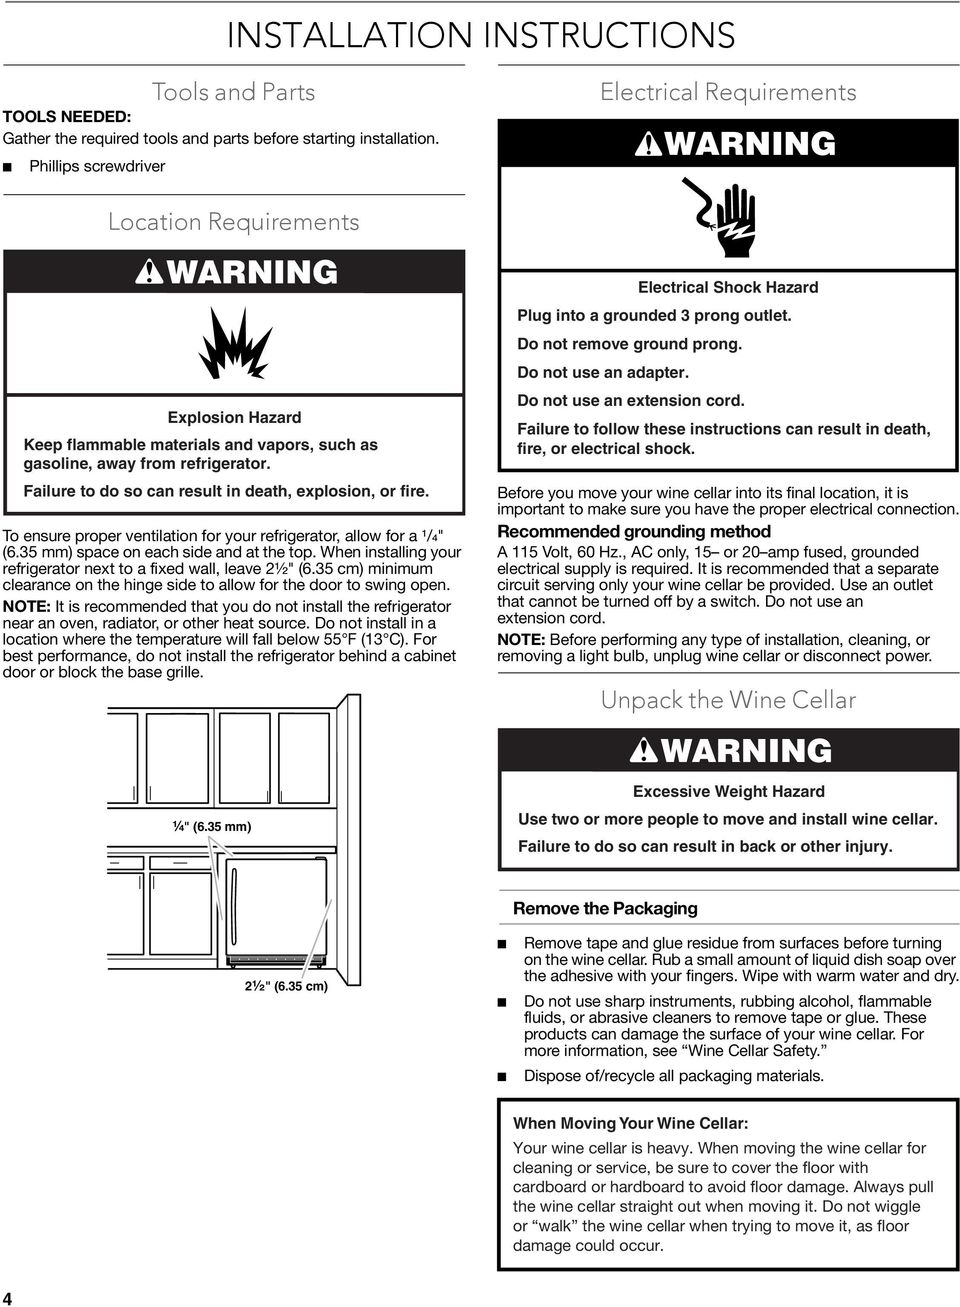 Failure to do so can result in death, explosion, or fire. To ensure proper ventilation for your refrigerator, allow for a ¹/₄" (6.35 mm) space on each side and at the top.